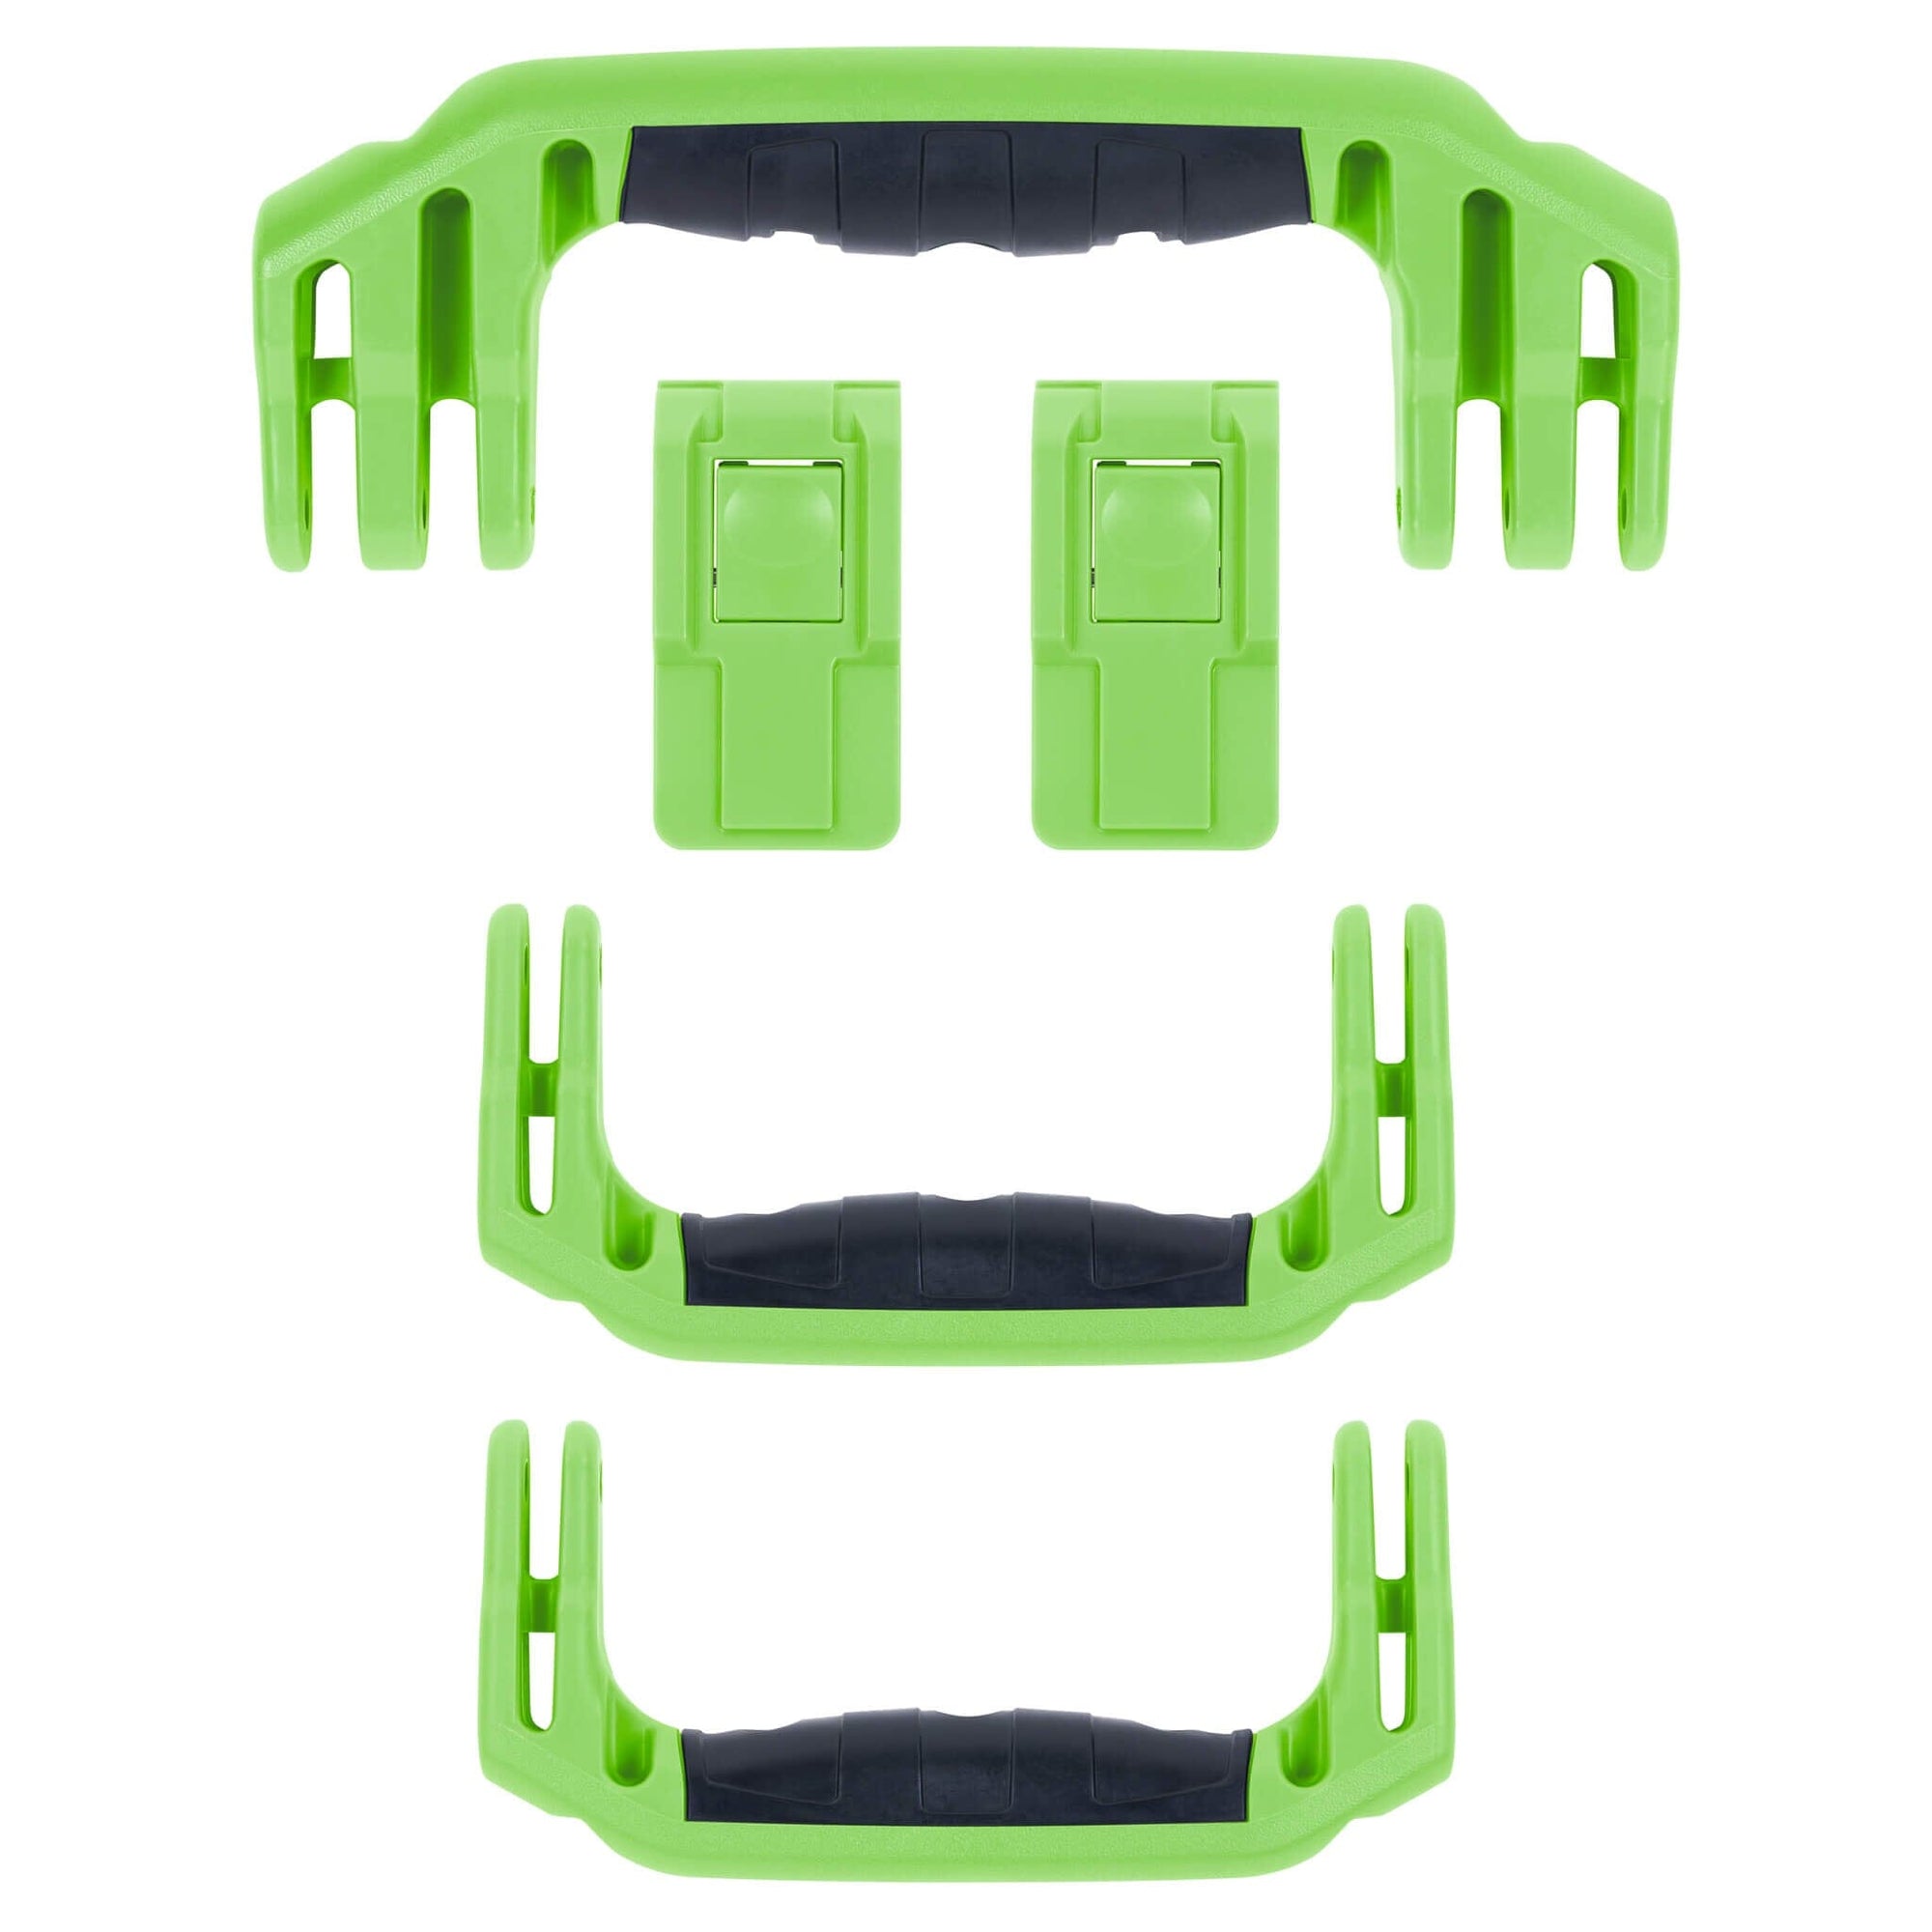 Pelican 1465 Air Replacement Handles & Latches, Lime Green (Set of 3 Handles, 2 Latches) ColorCase 